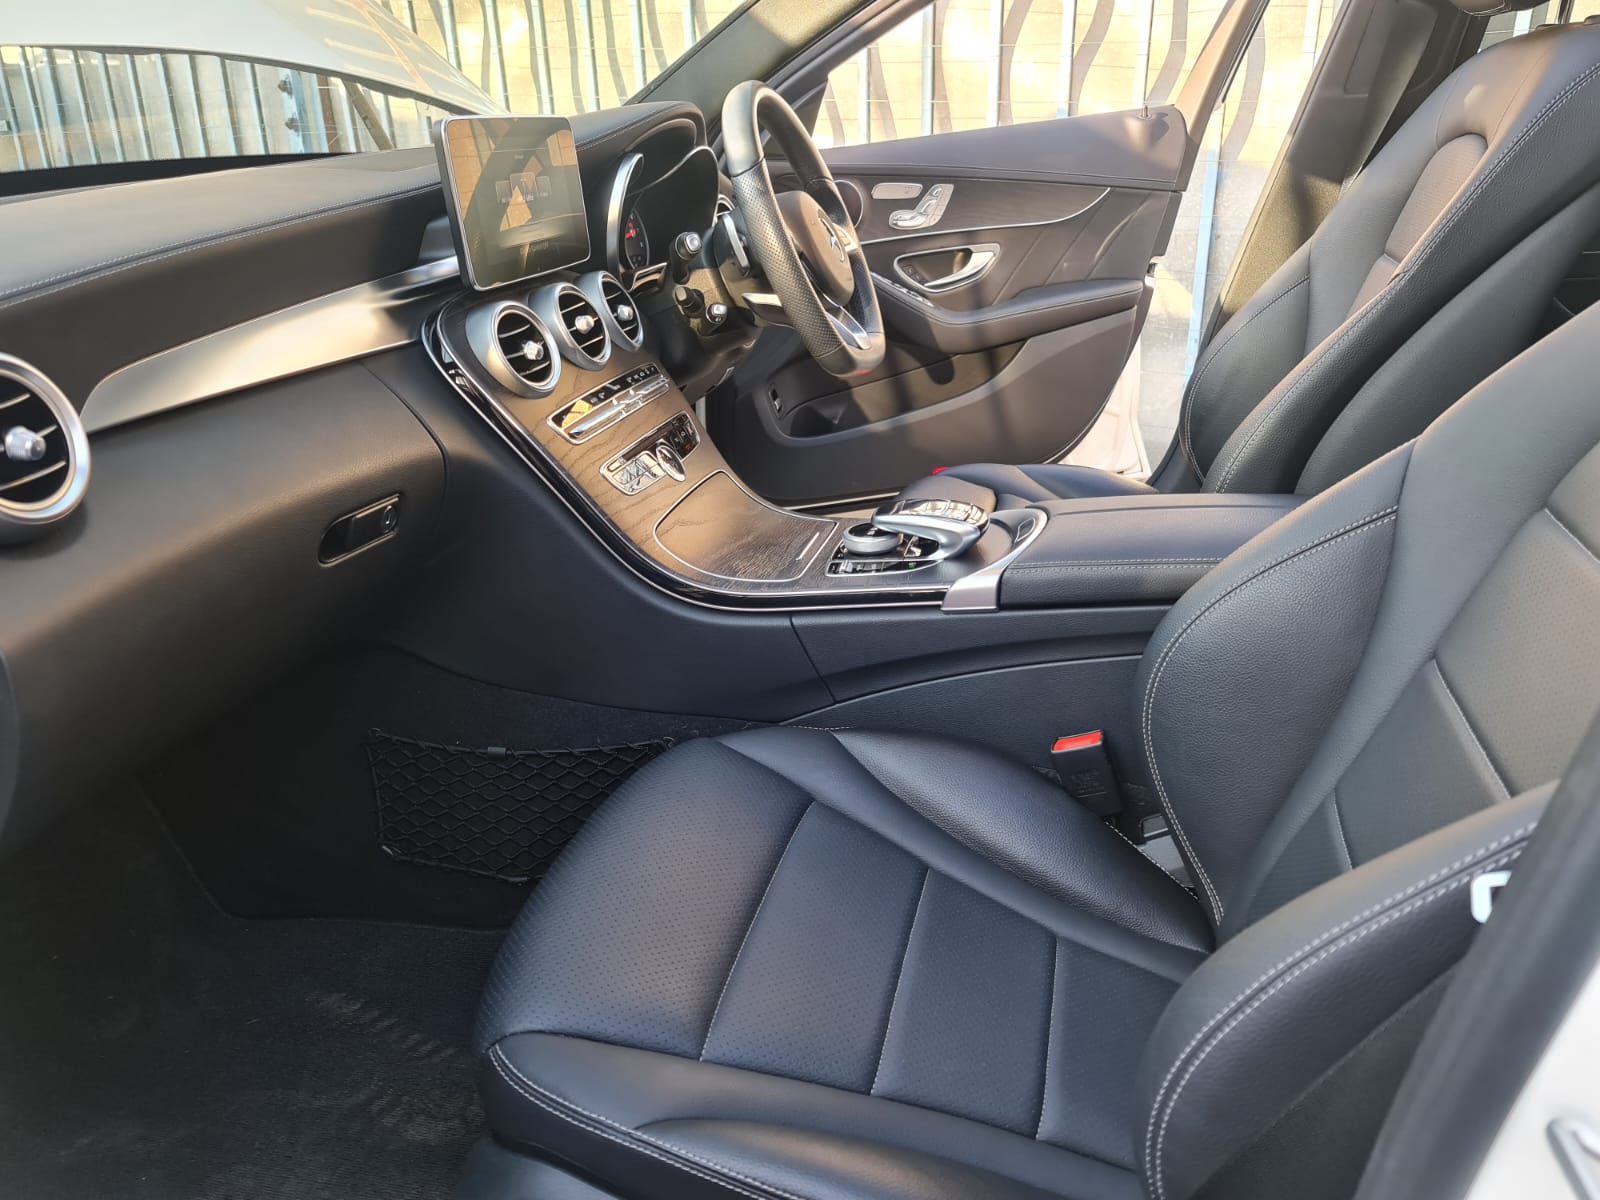 Mercedes Benz C200 AMG 2015 sunroof leather Trade in OK